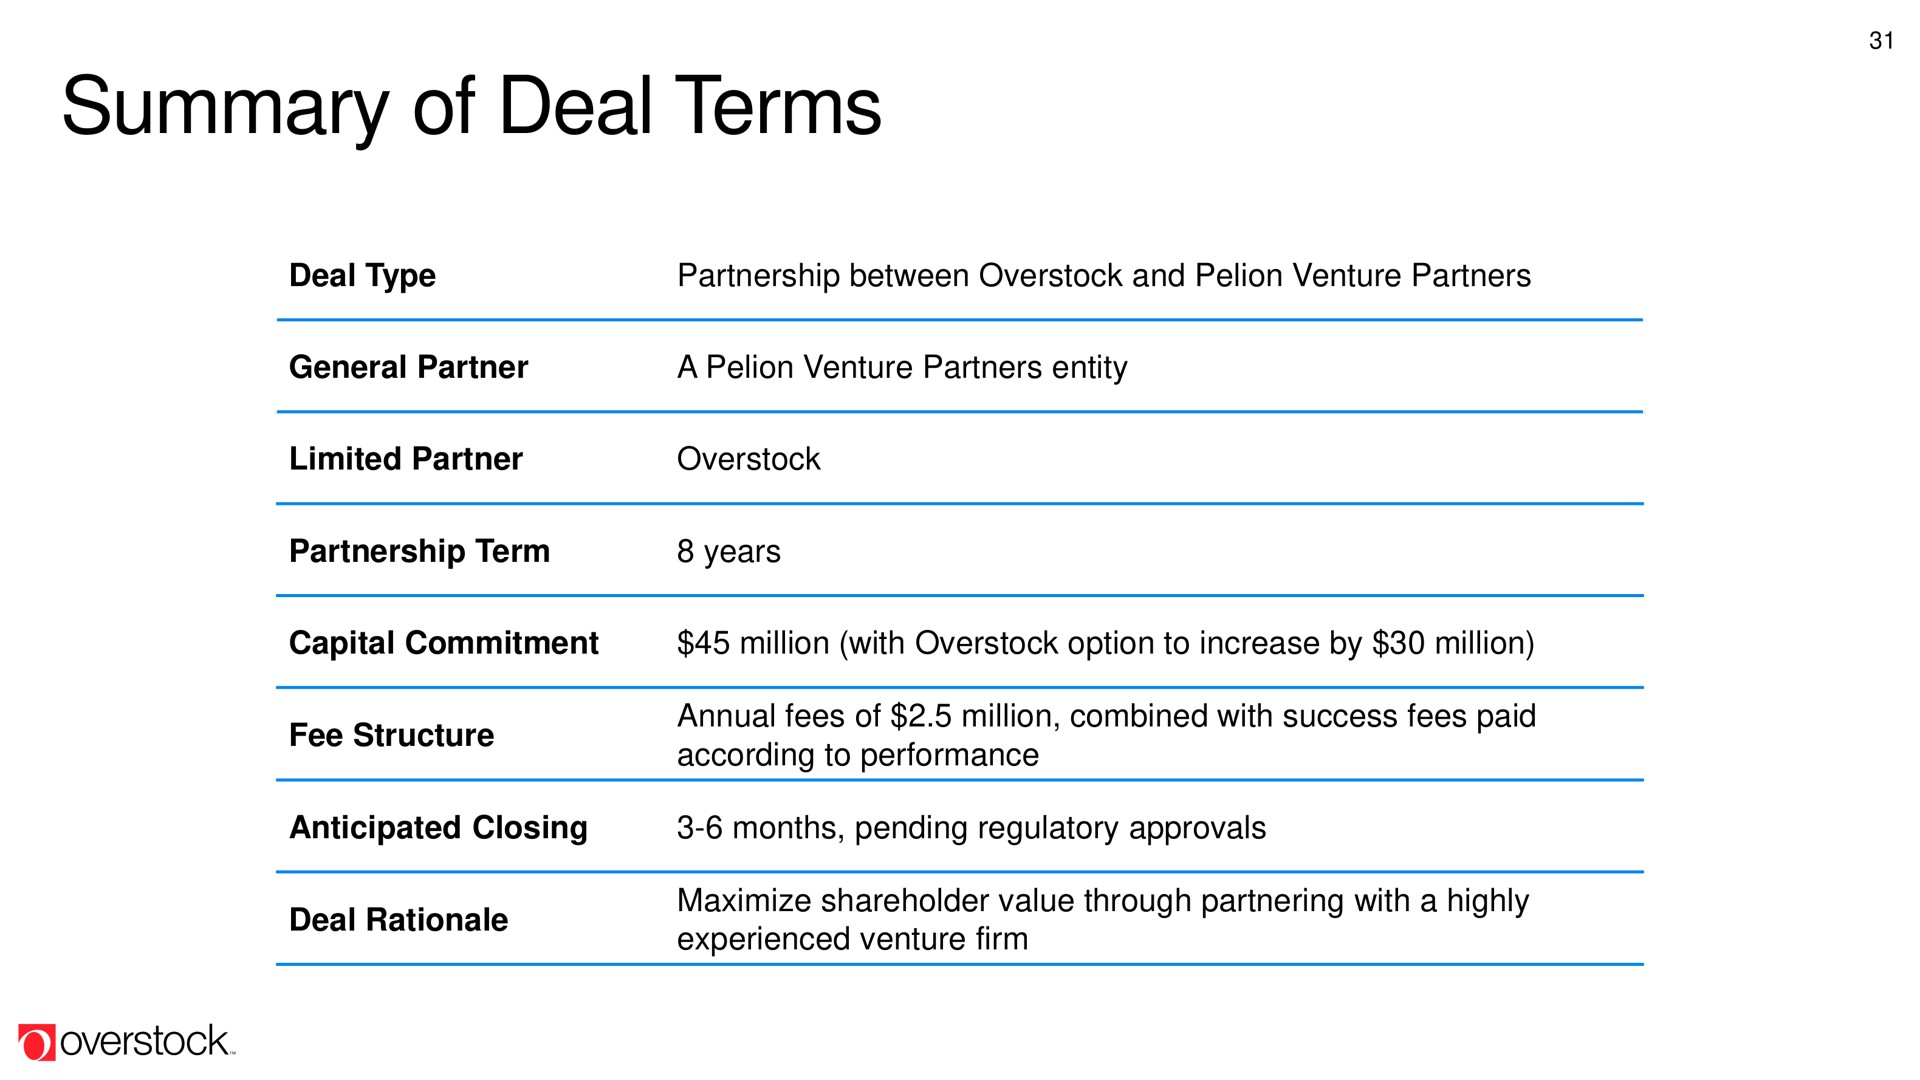 summary of deal terms | Overstock